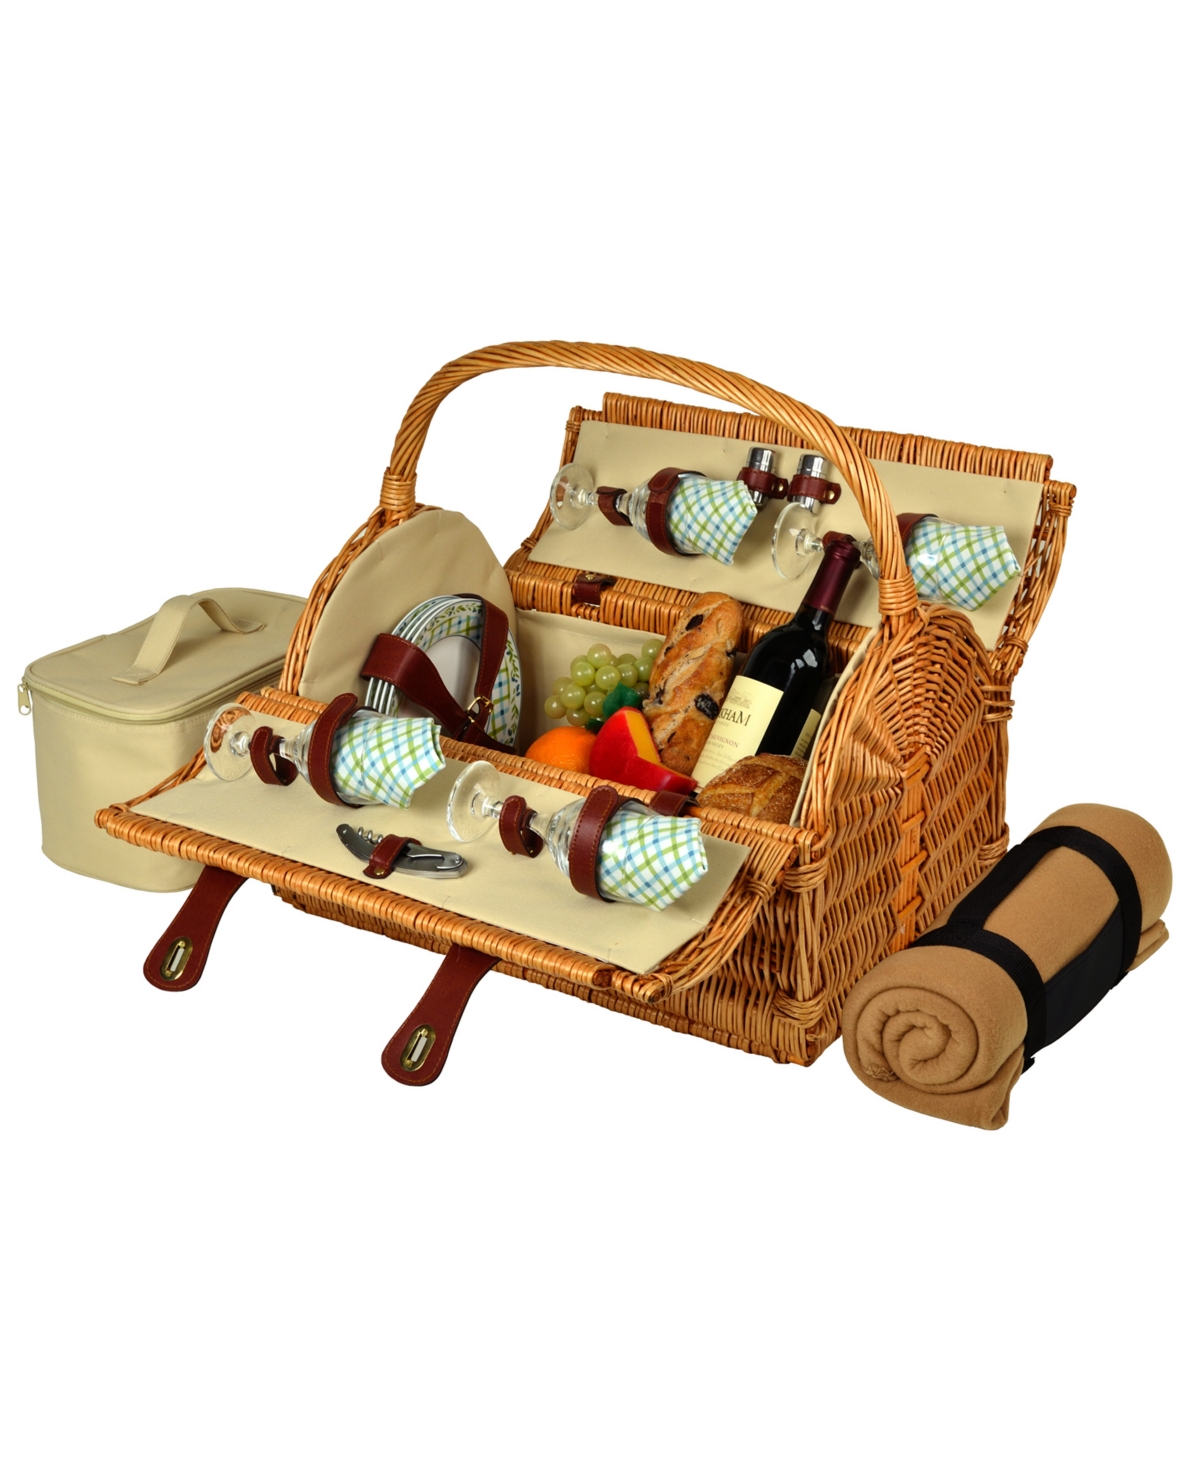 Yorkshire Willow Picnic Basket with Service for 4 with Blanket - Turquoise